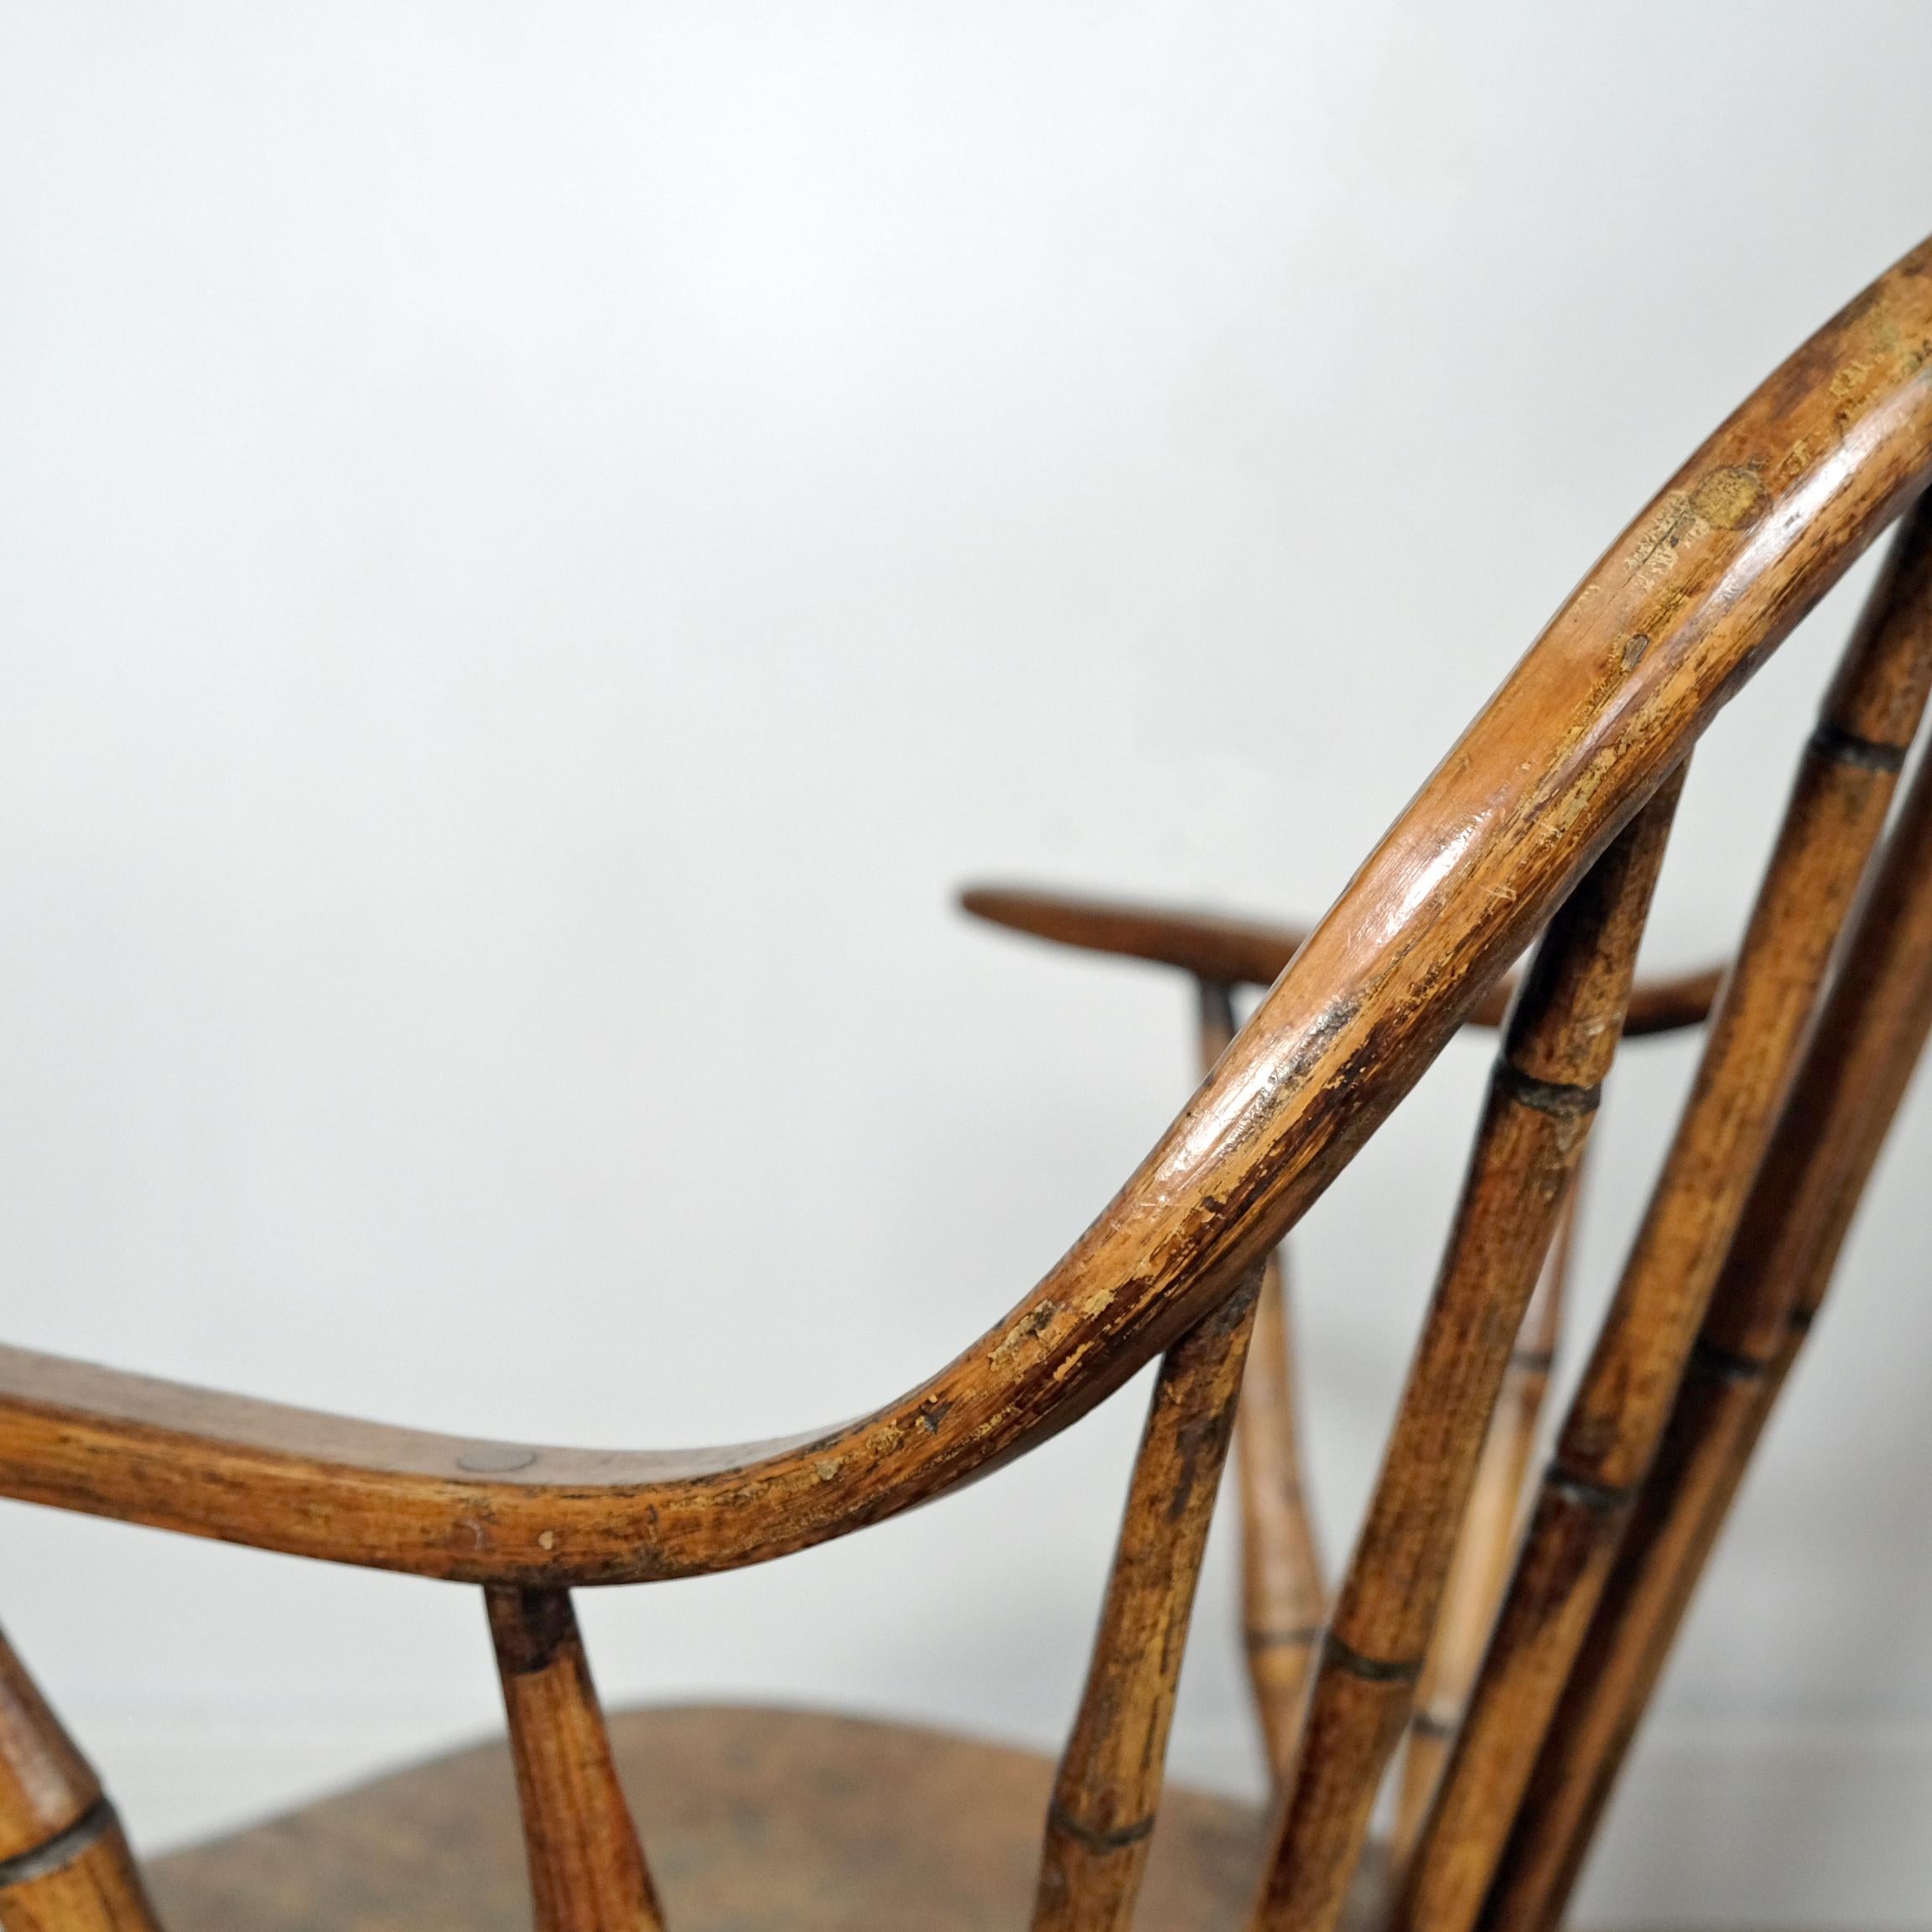 Continuous Arm Yealmpton Windsor Chair, English, Armchair, Original Paint, 1820s 3